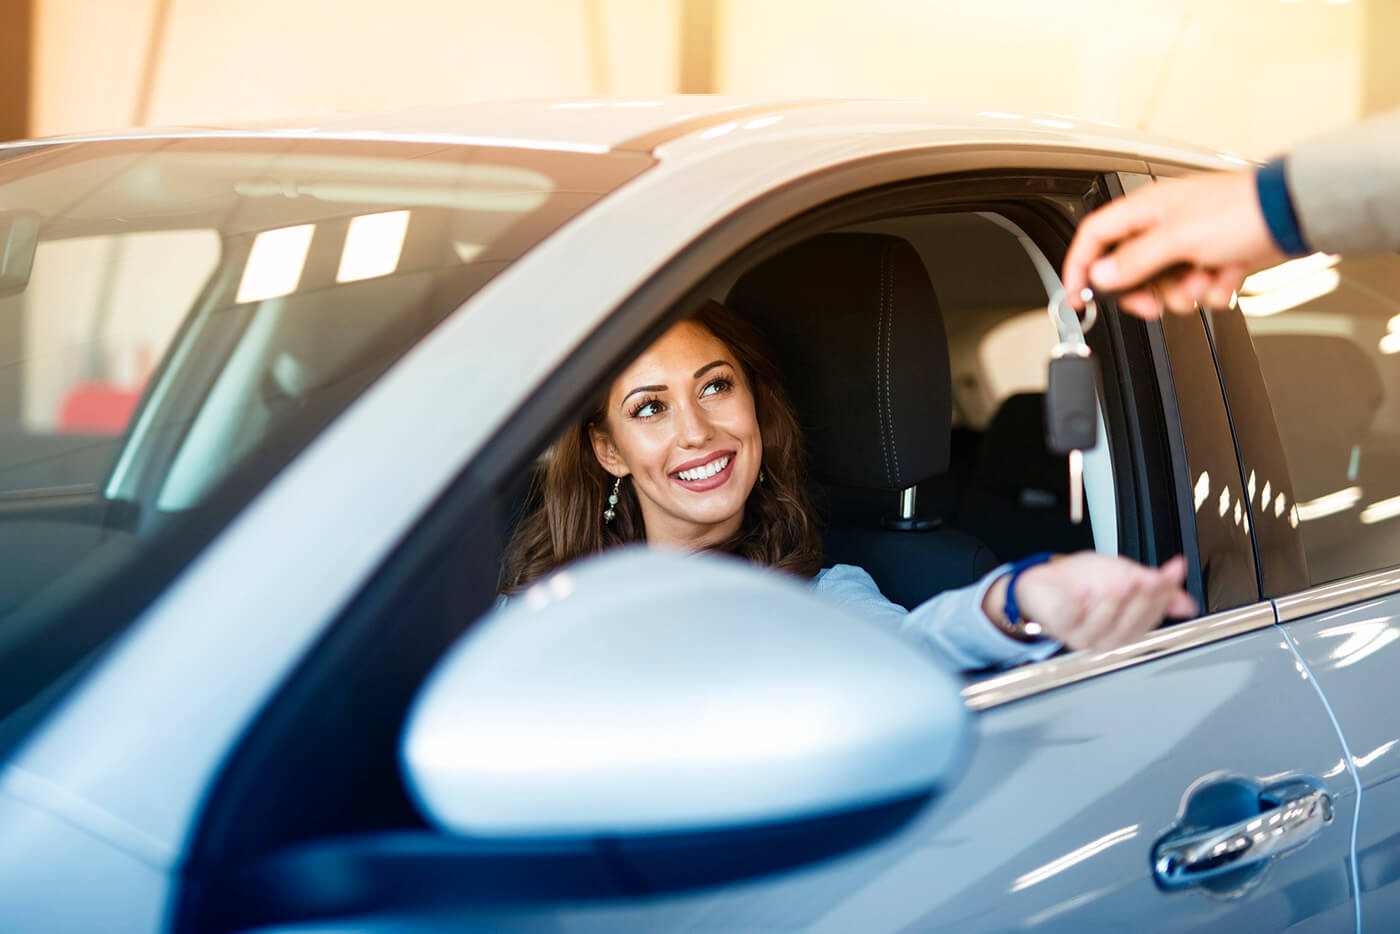 Understanding the Available Insurance Options for Car Leasing